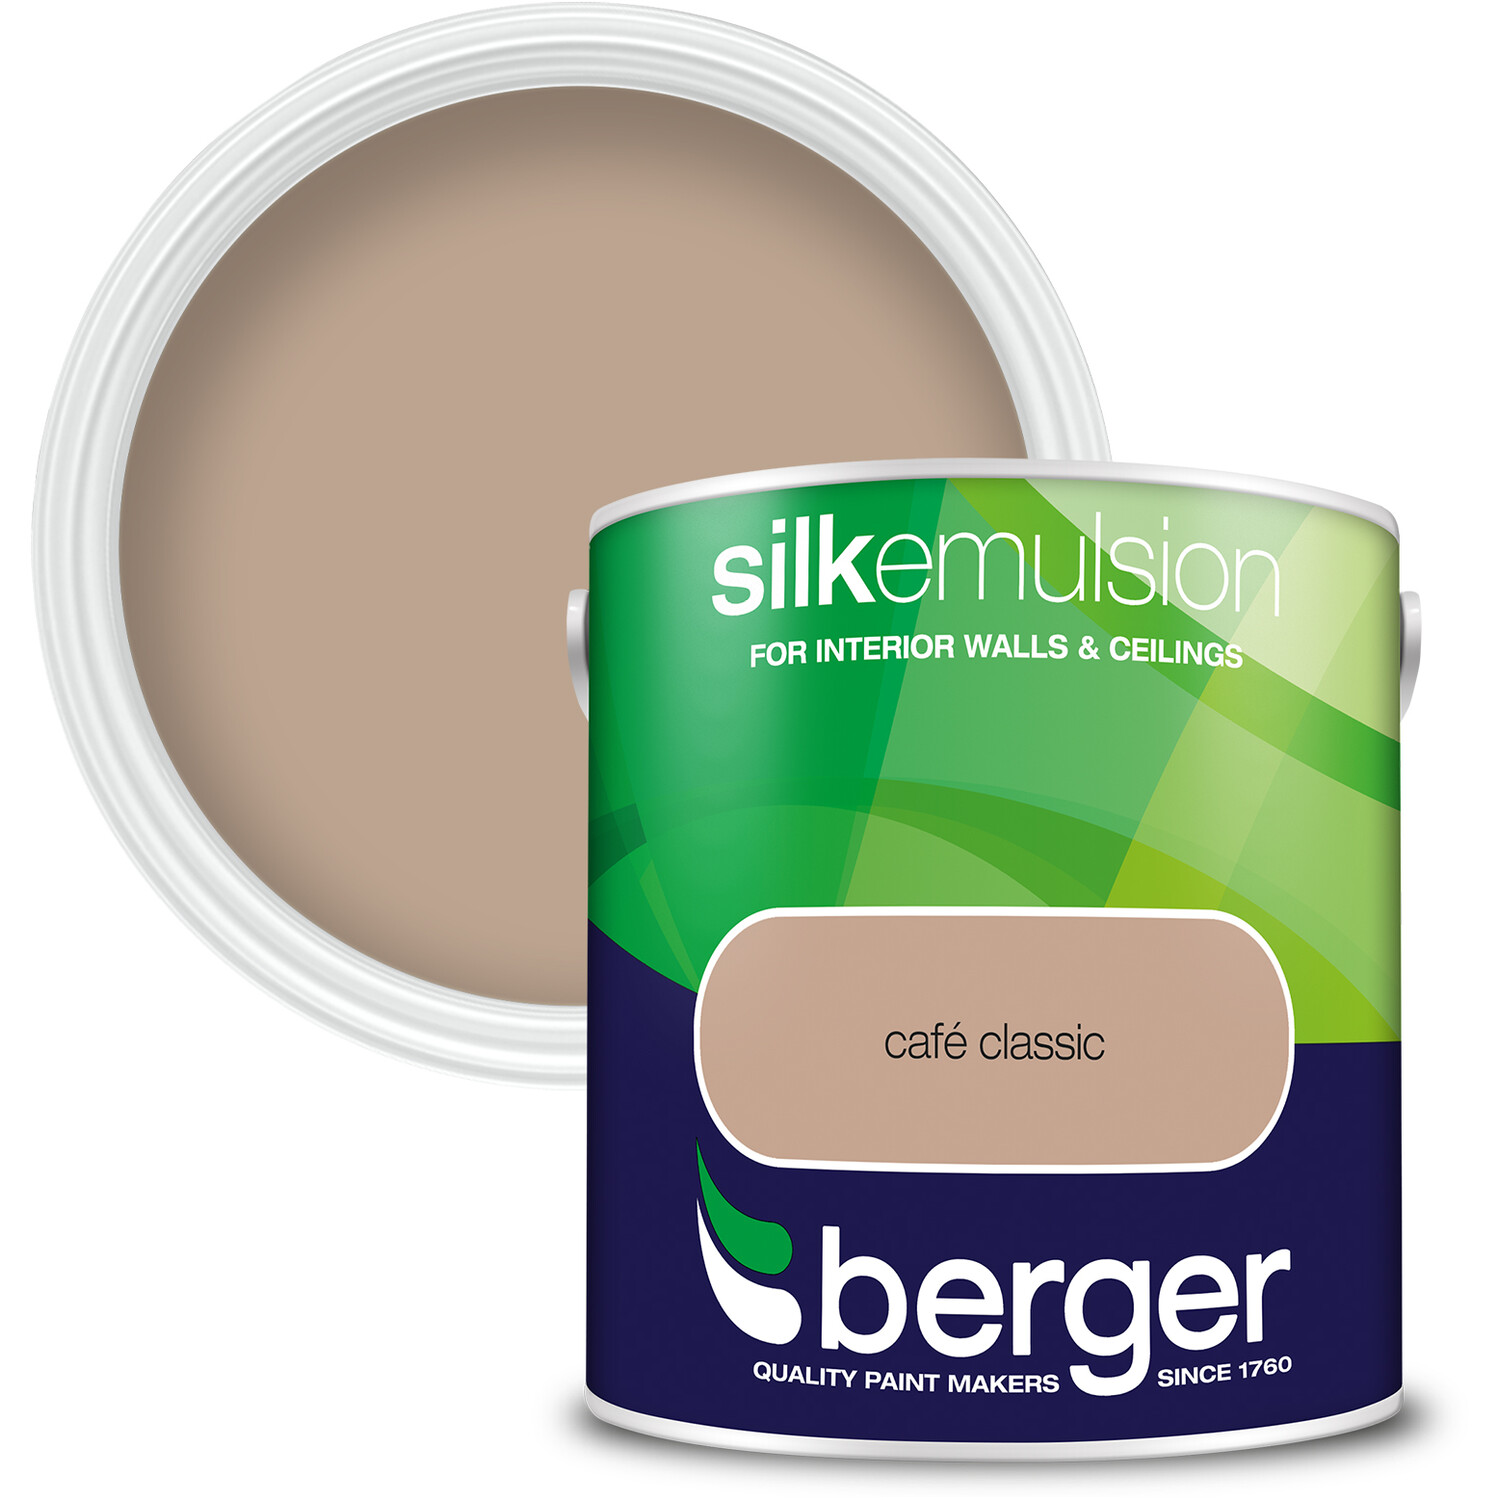 Berger Walls & Ceilings Cafe Classic Silk Emulsion Paint 2.5L Image 1